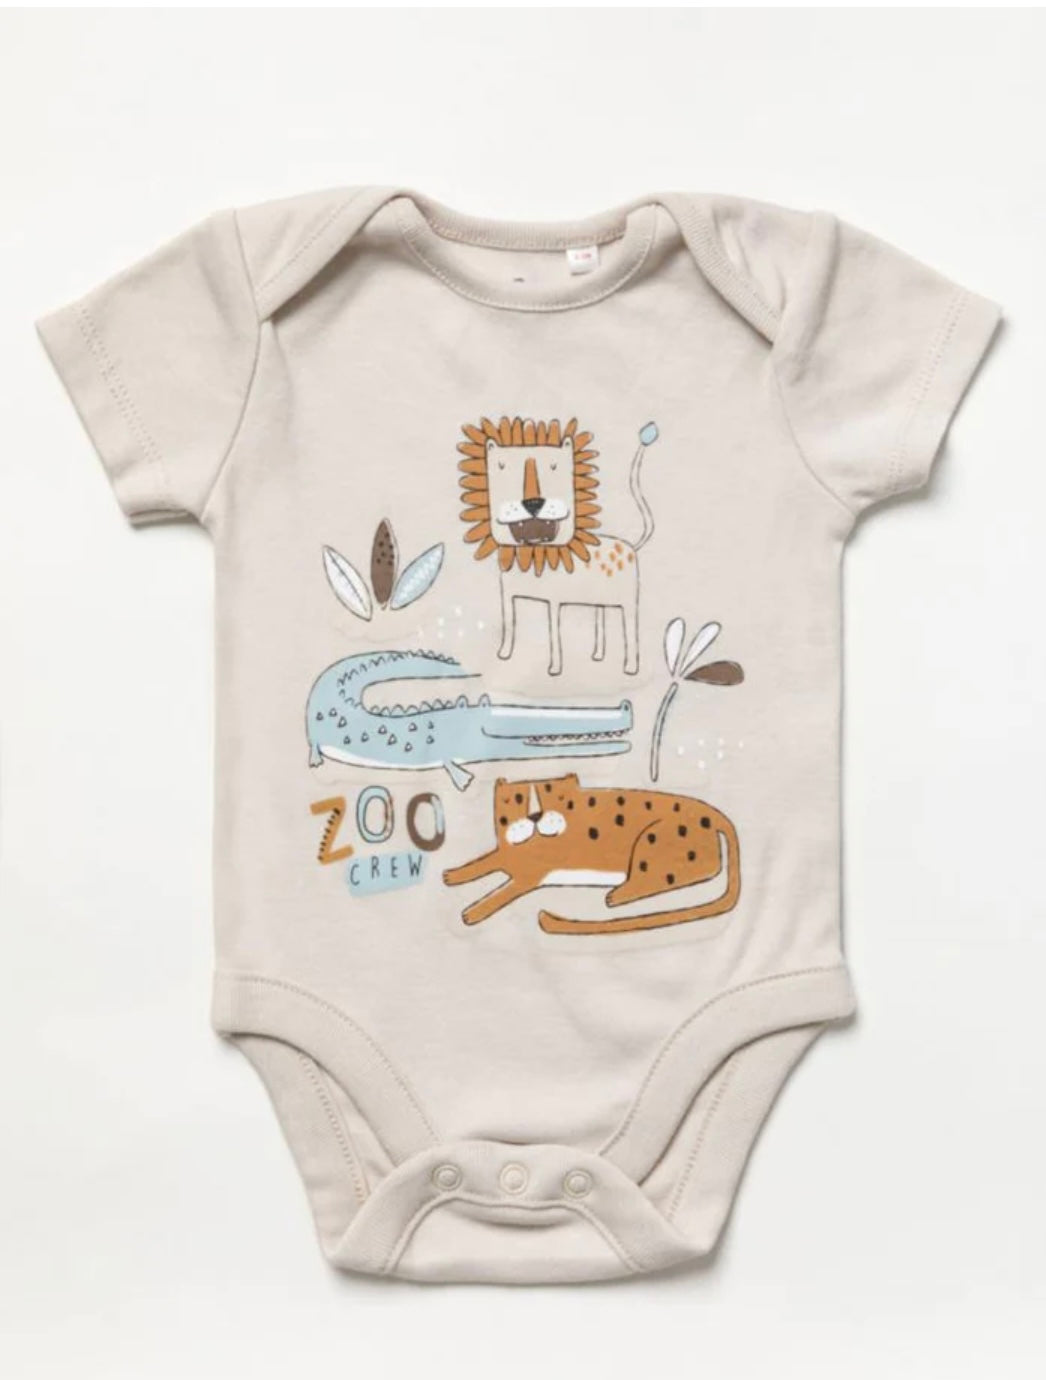 Baby Boys 3 piece Outfit Set- Zoo Crew